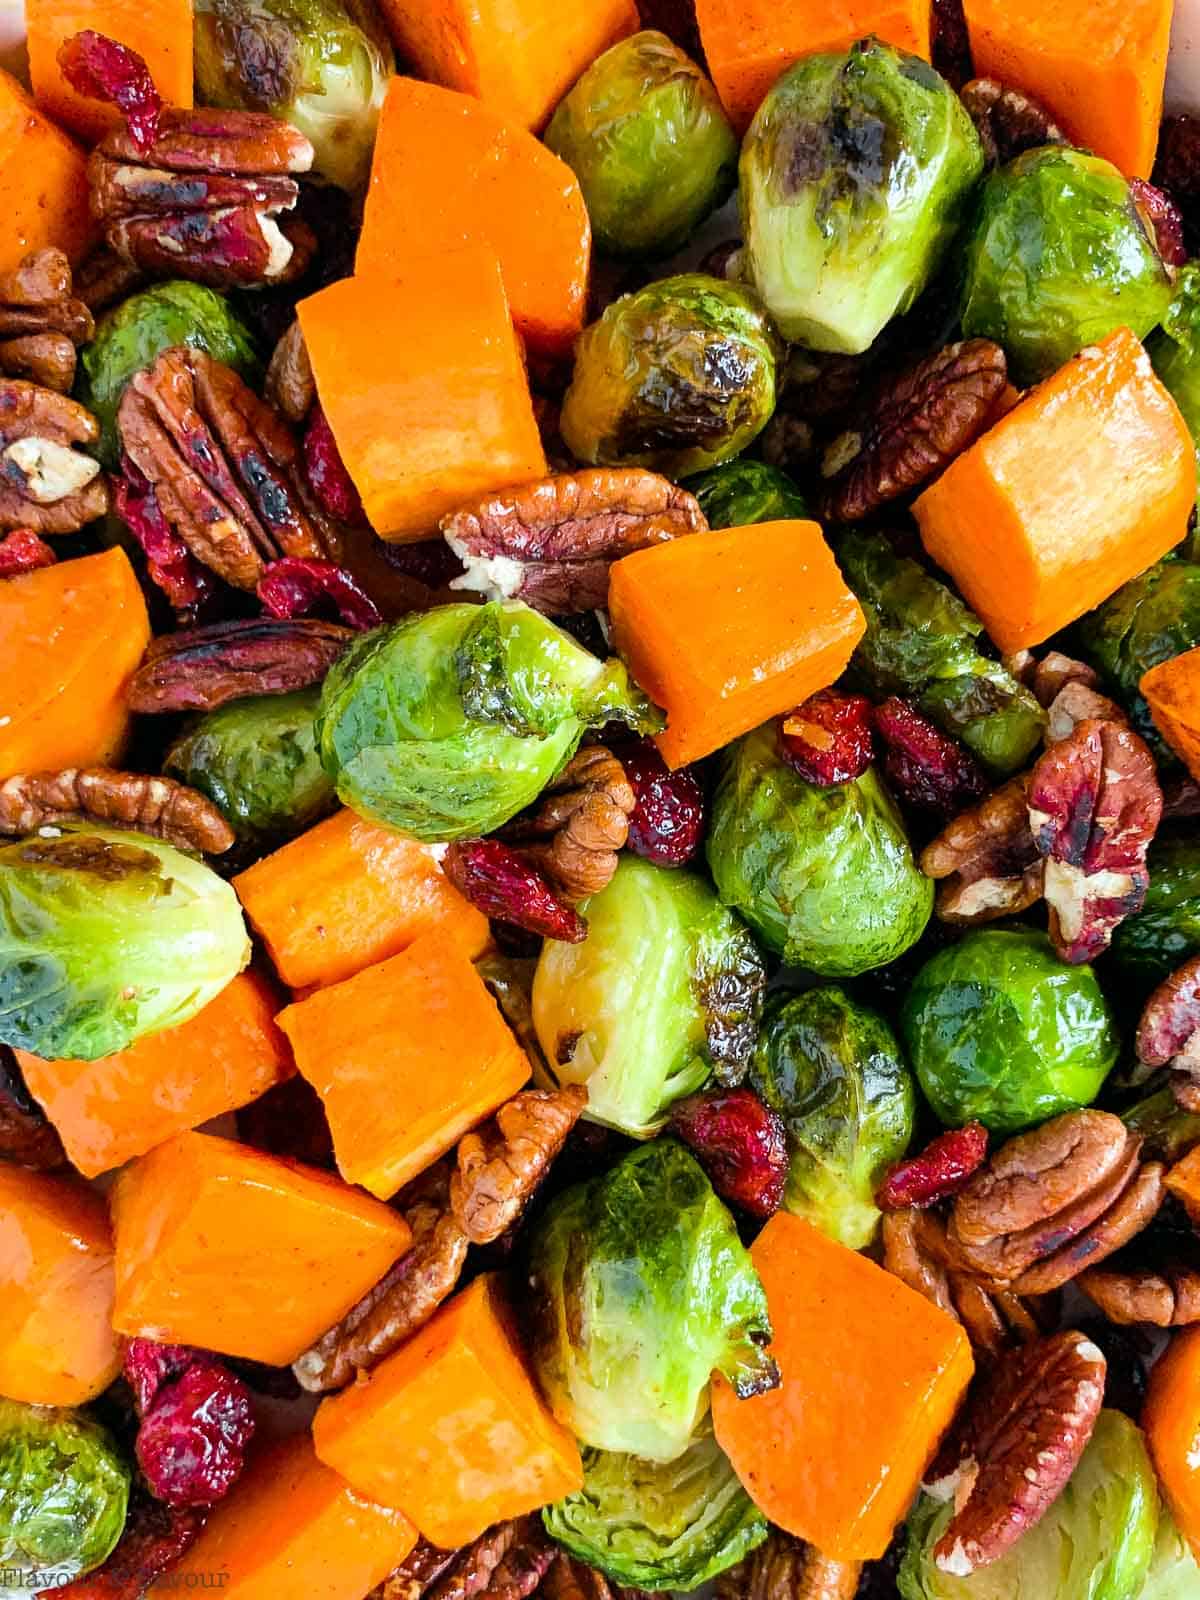 A medley of roasted vegetables with Brussels sprouts and sweet potatoes.